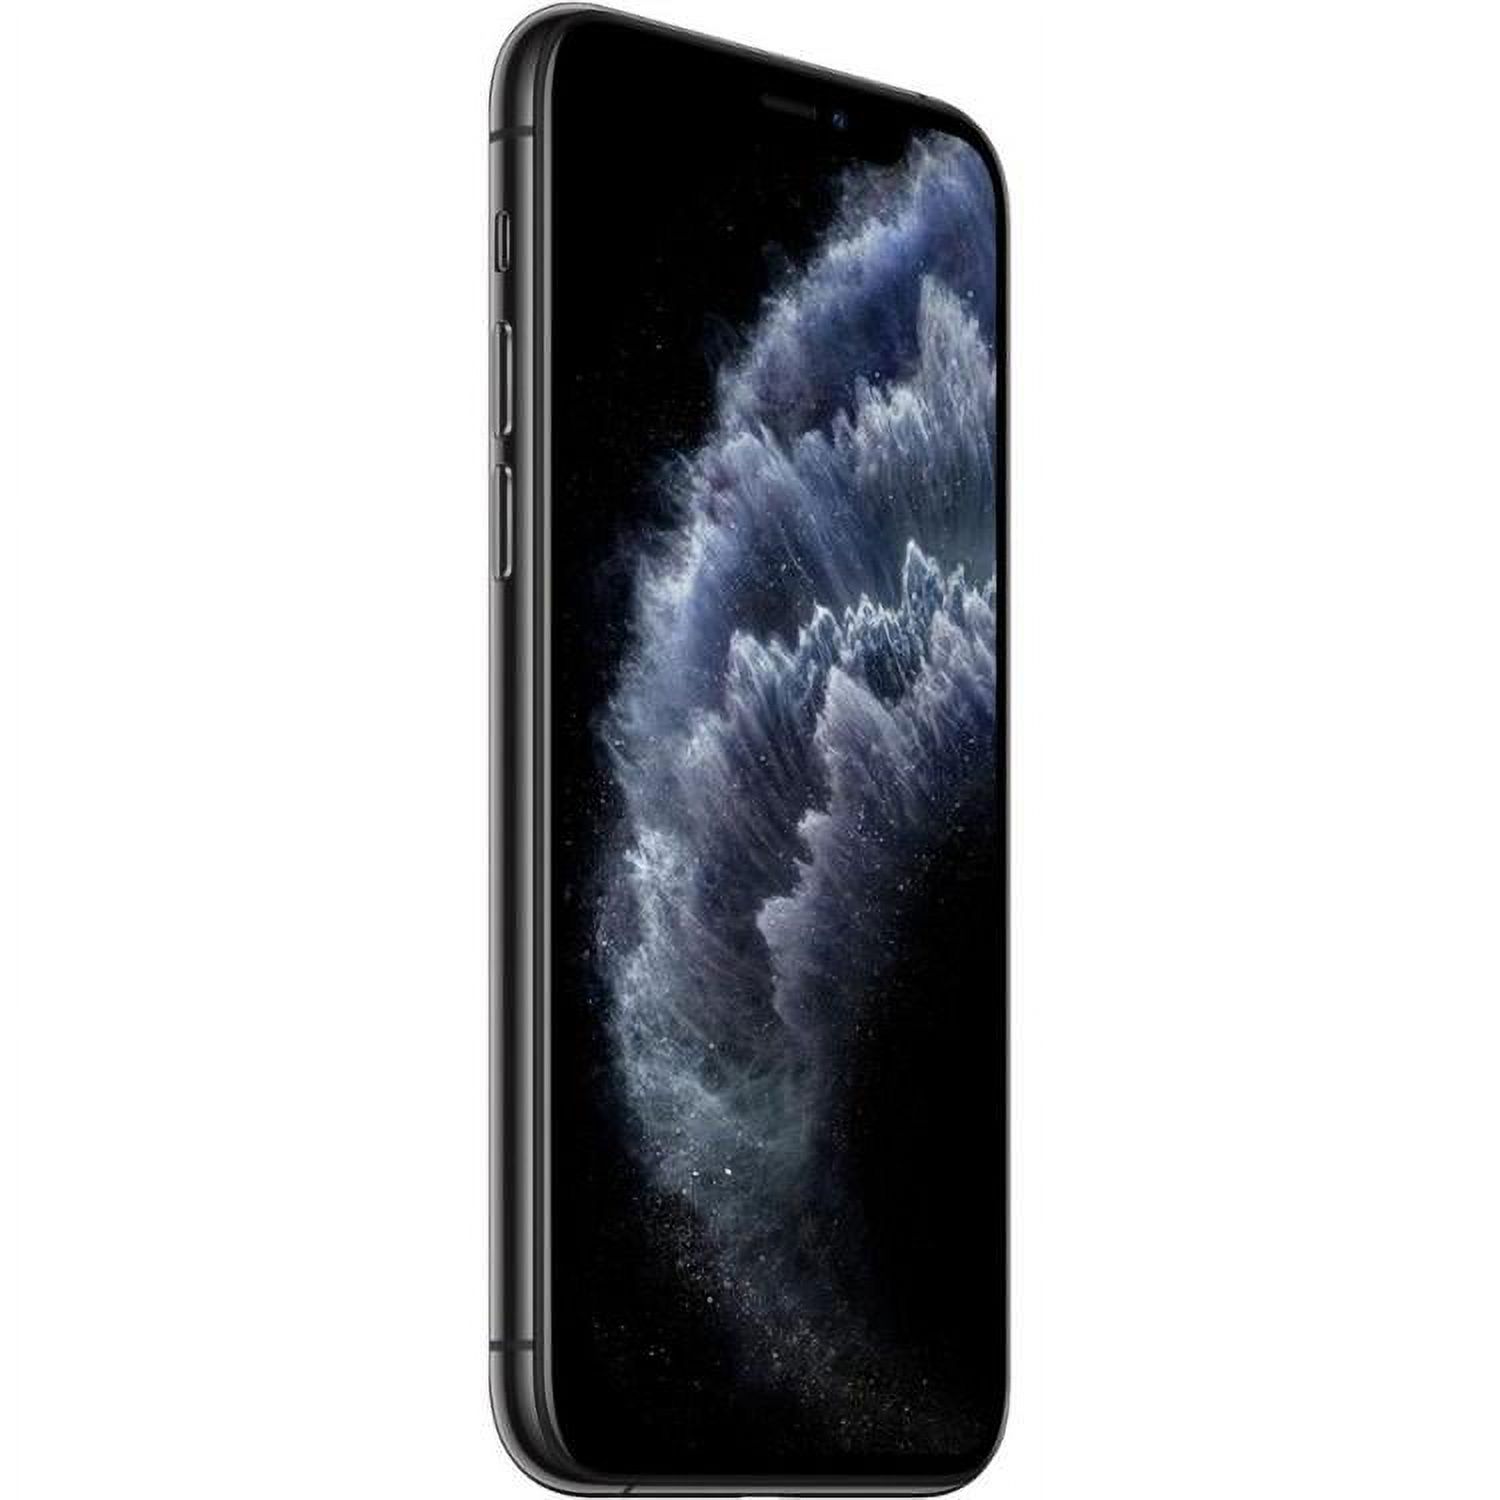 Apple iPhone 11 Pro 64GB Space Gray LTE Cellular Straight Talk/TracFone MWCH2LL/A - TF - image 2 of 4